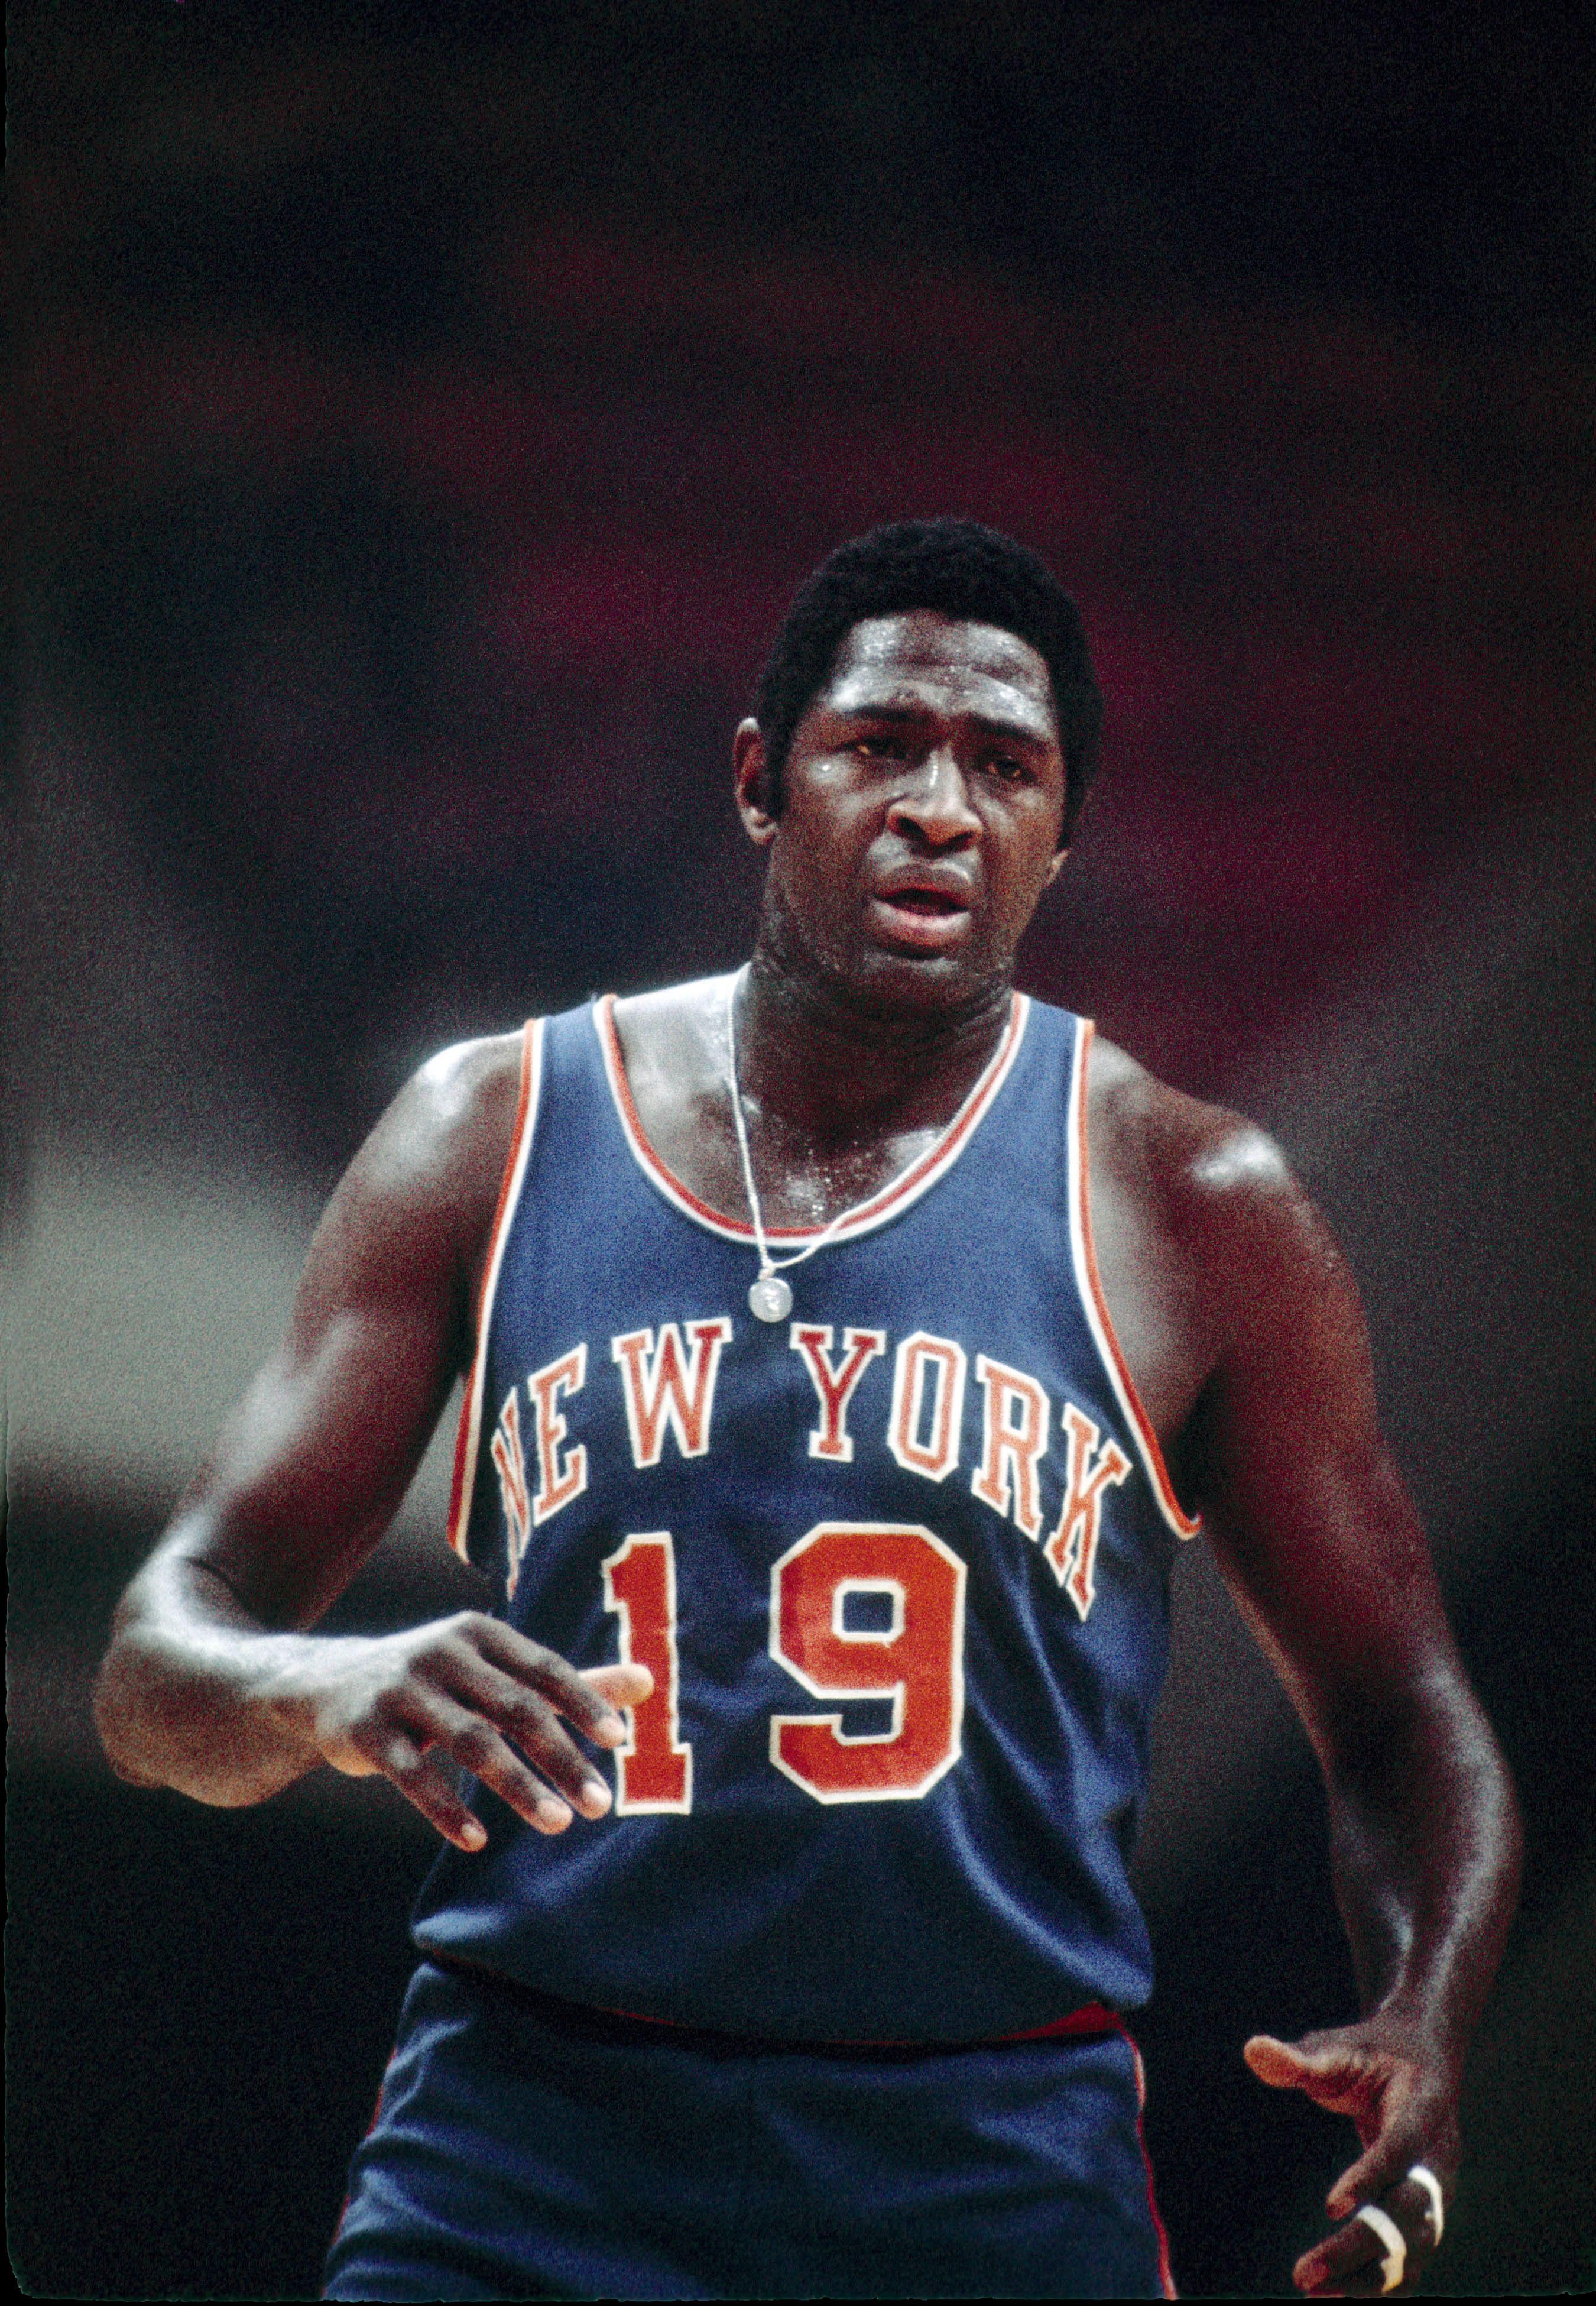 The Top 10 New York Knicks Players of All Time